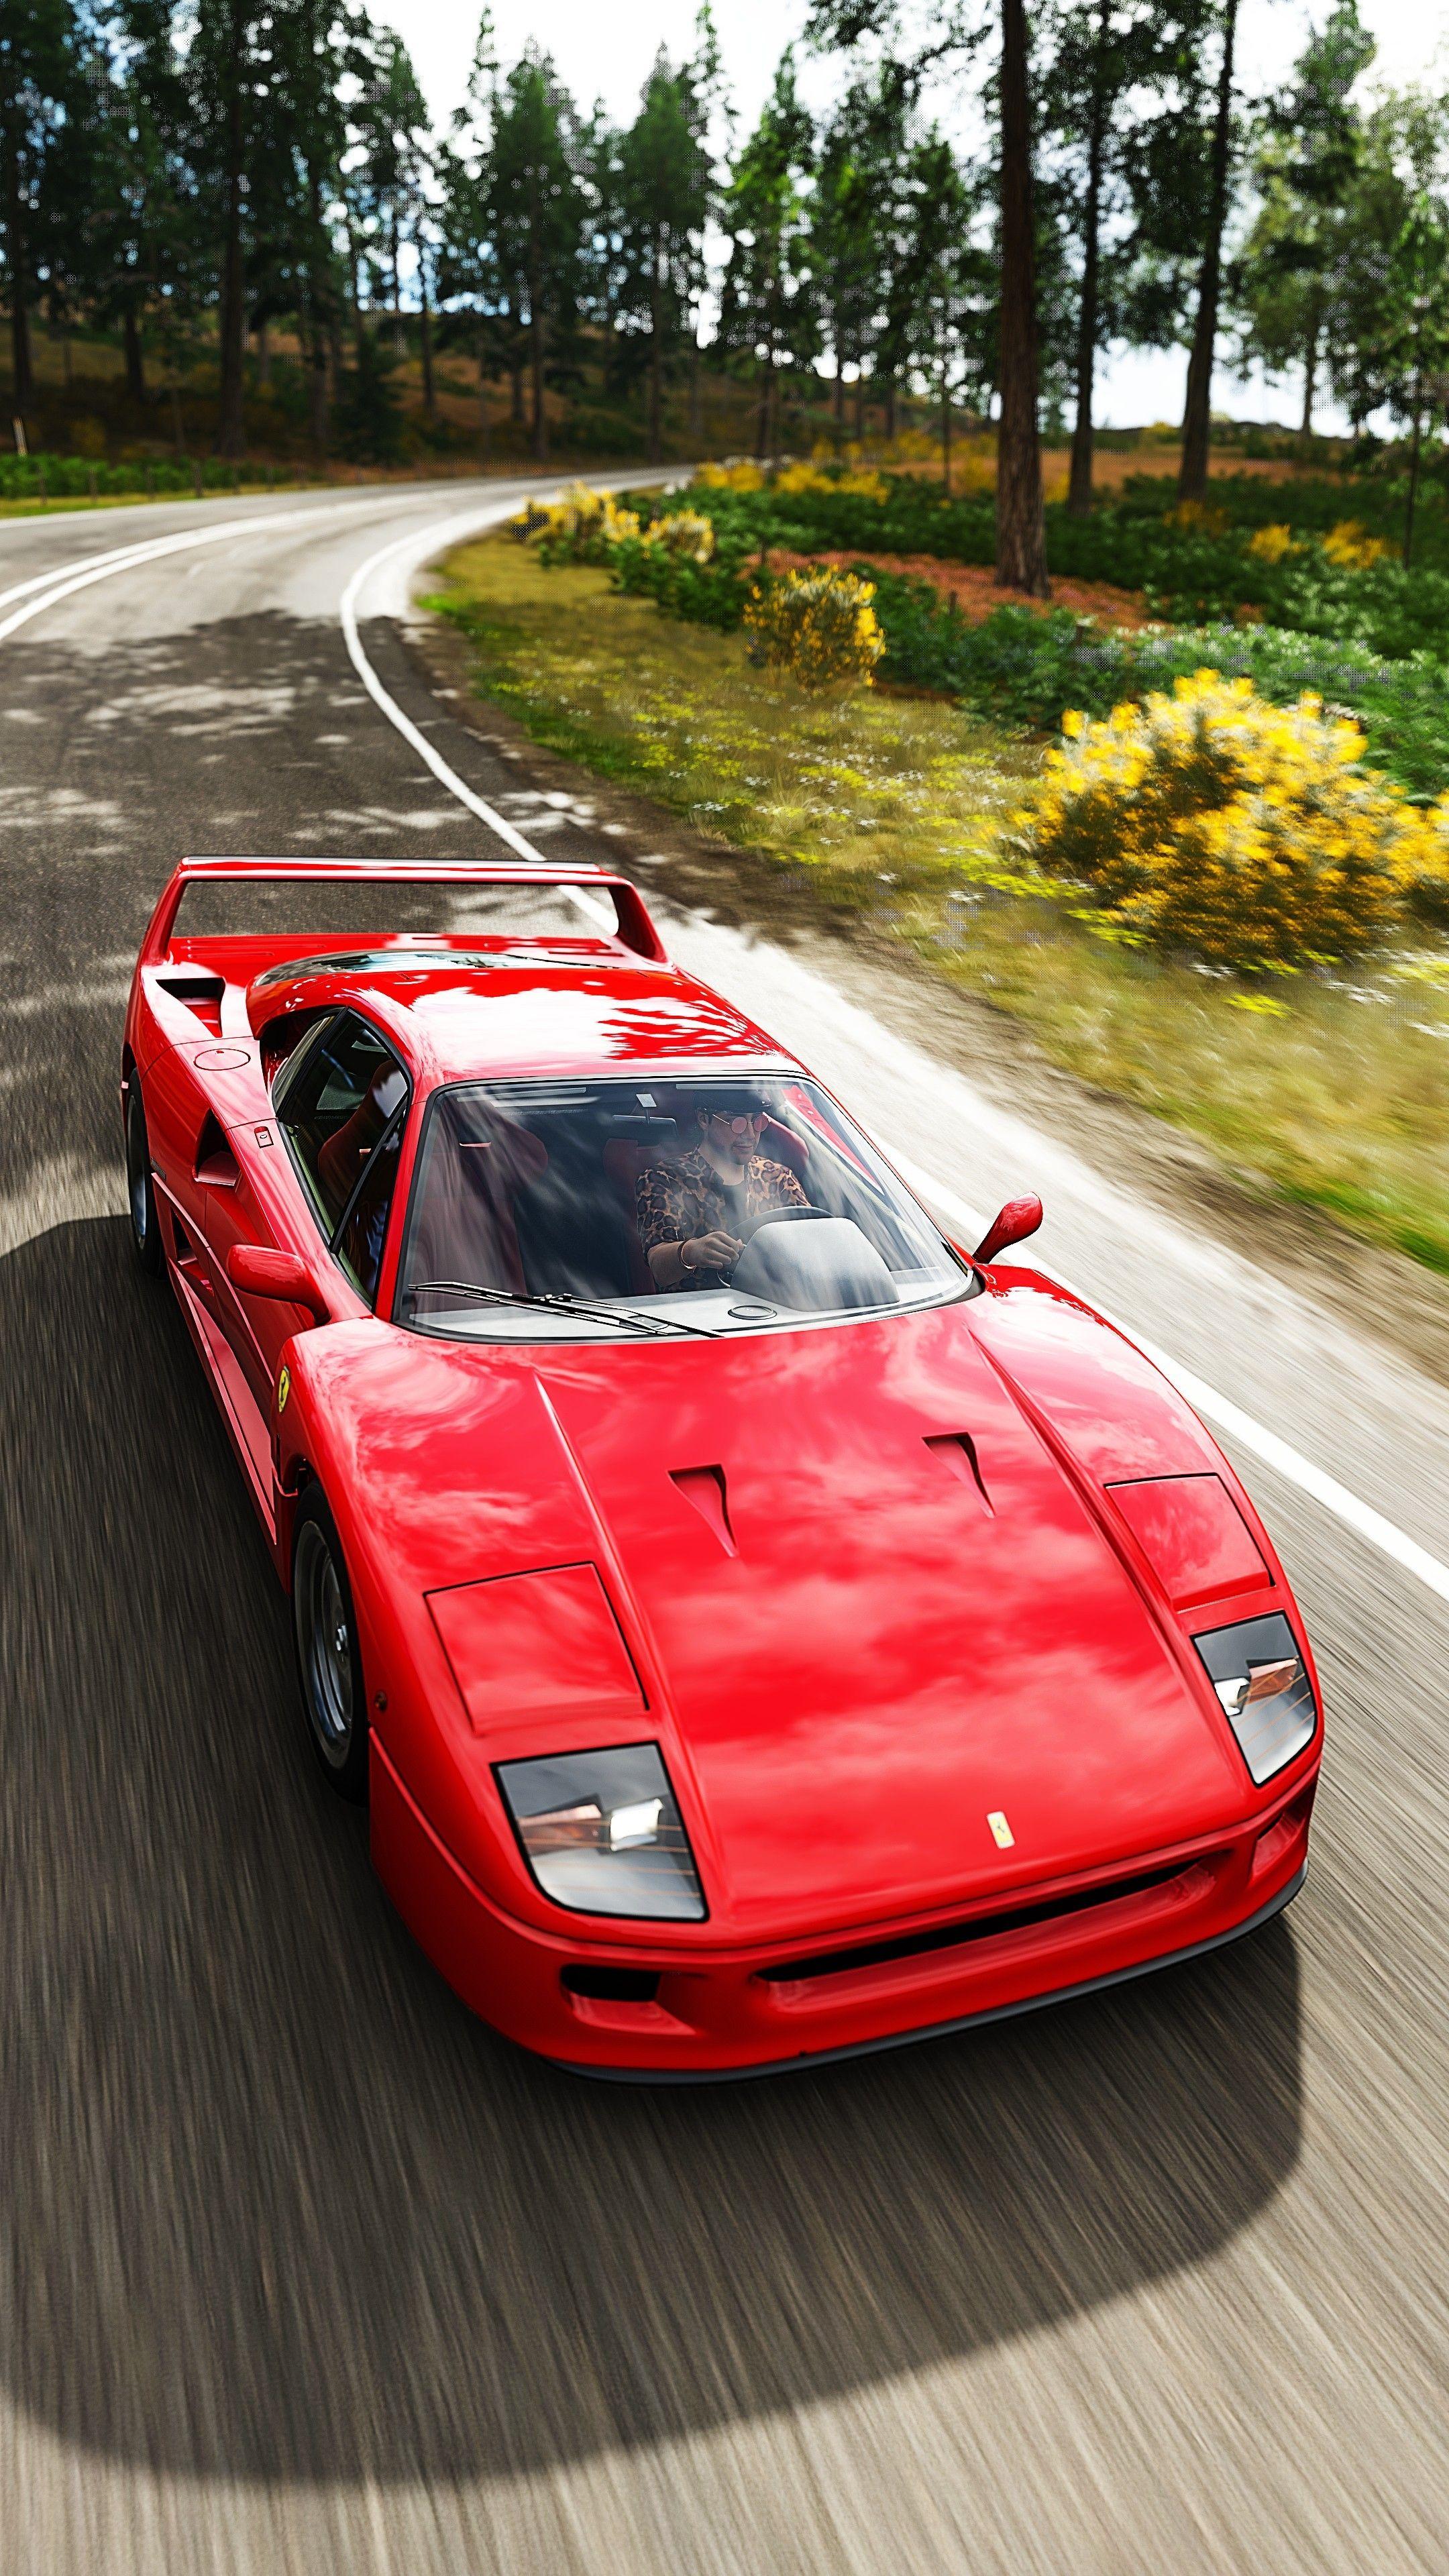 Ferrari F40 Wallpapers Pictures Images